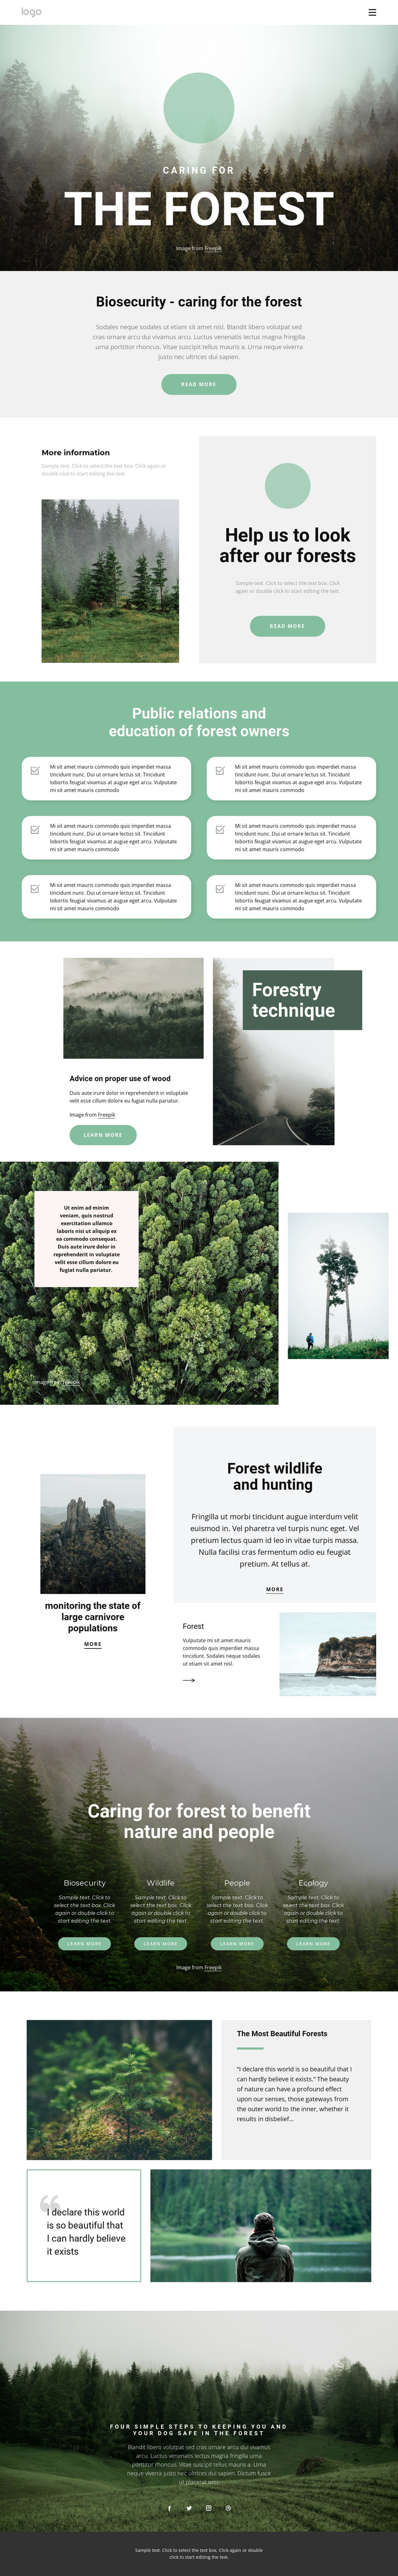 Caring for parks and forests One Page Template